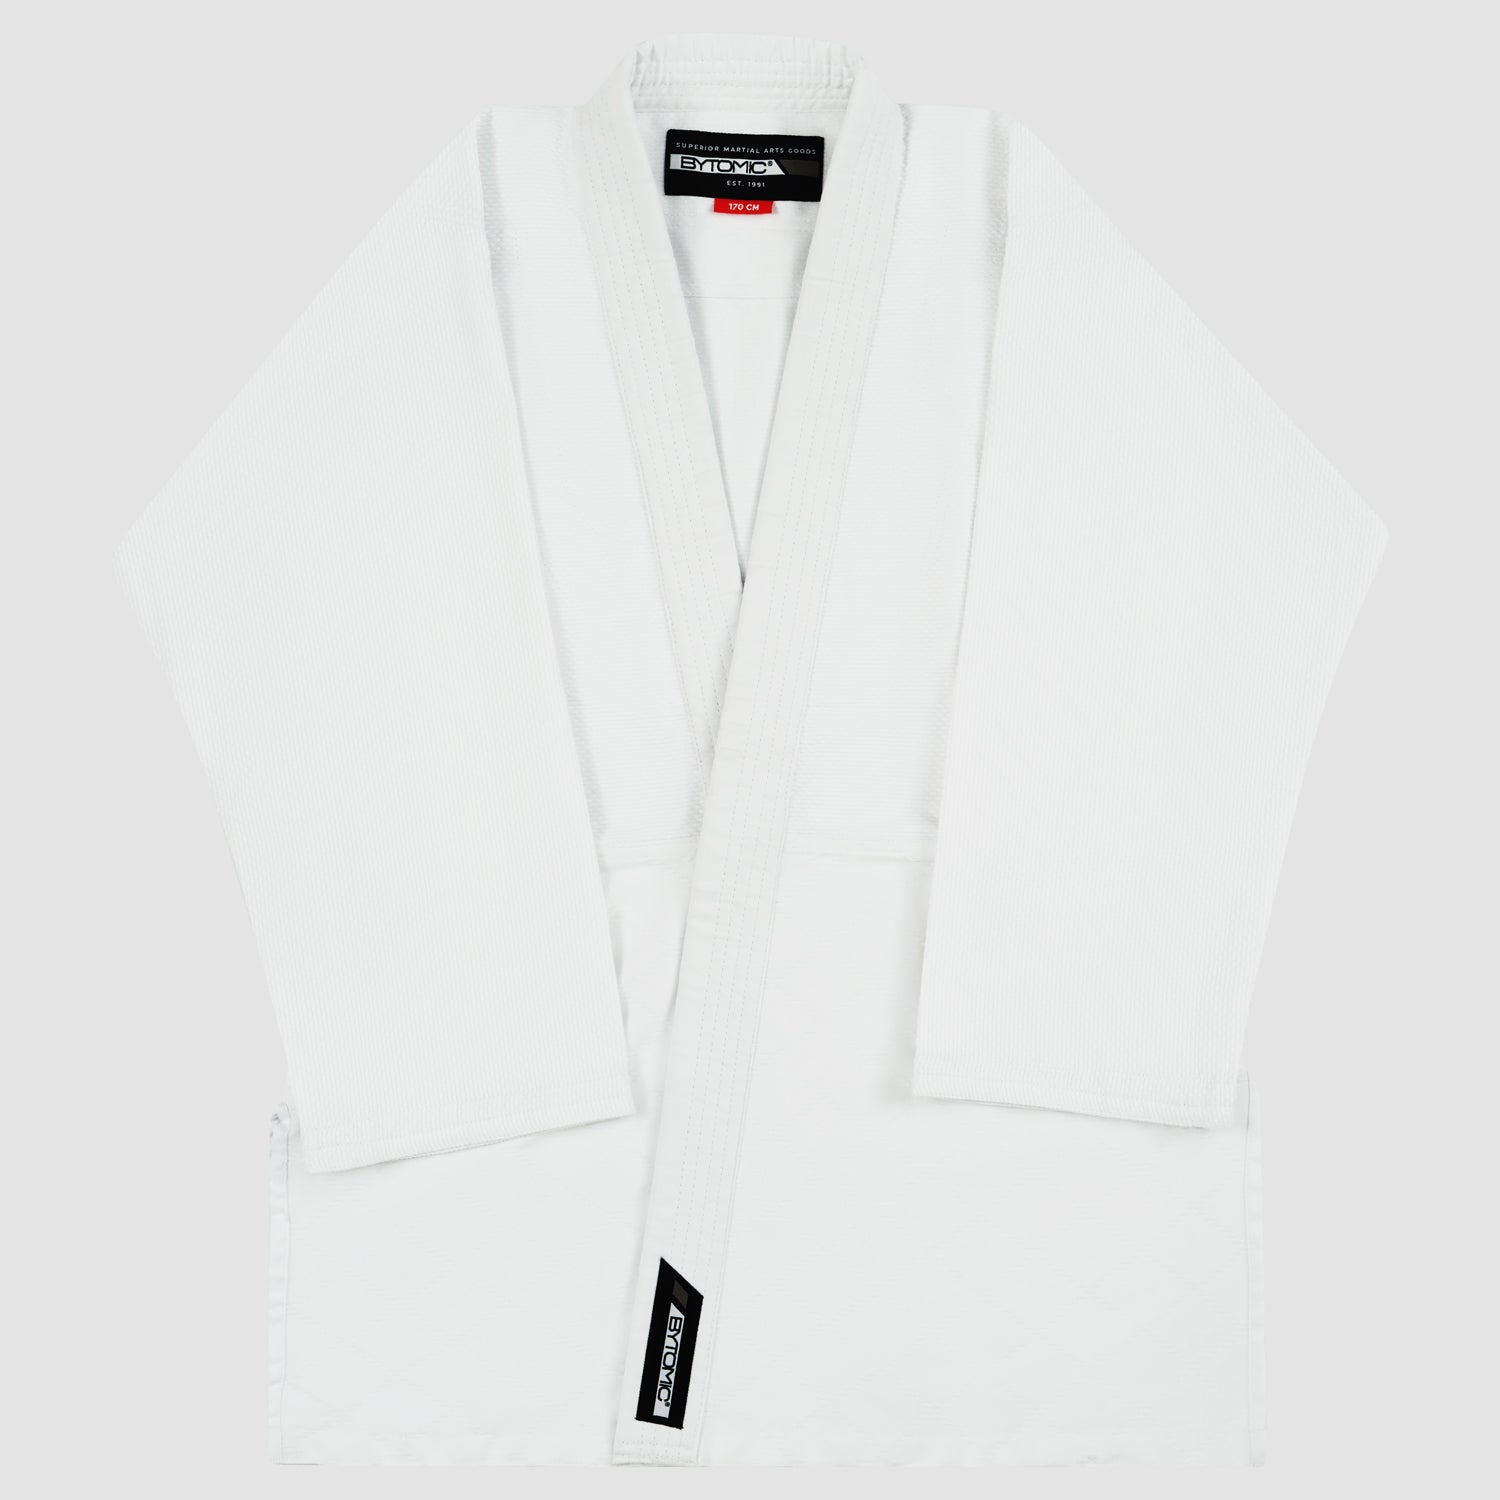 White Bytomic Red Label Adult Judo Uniform  Fight Co